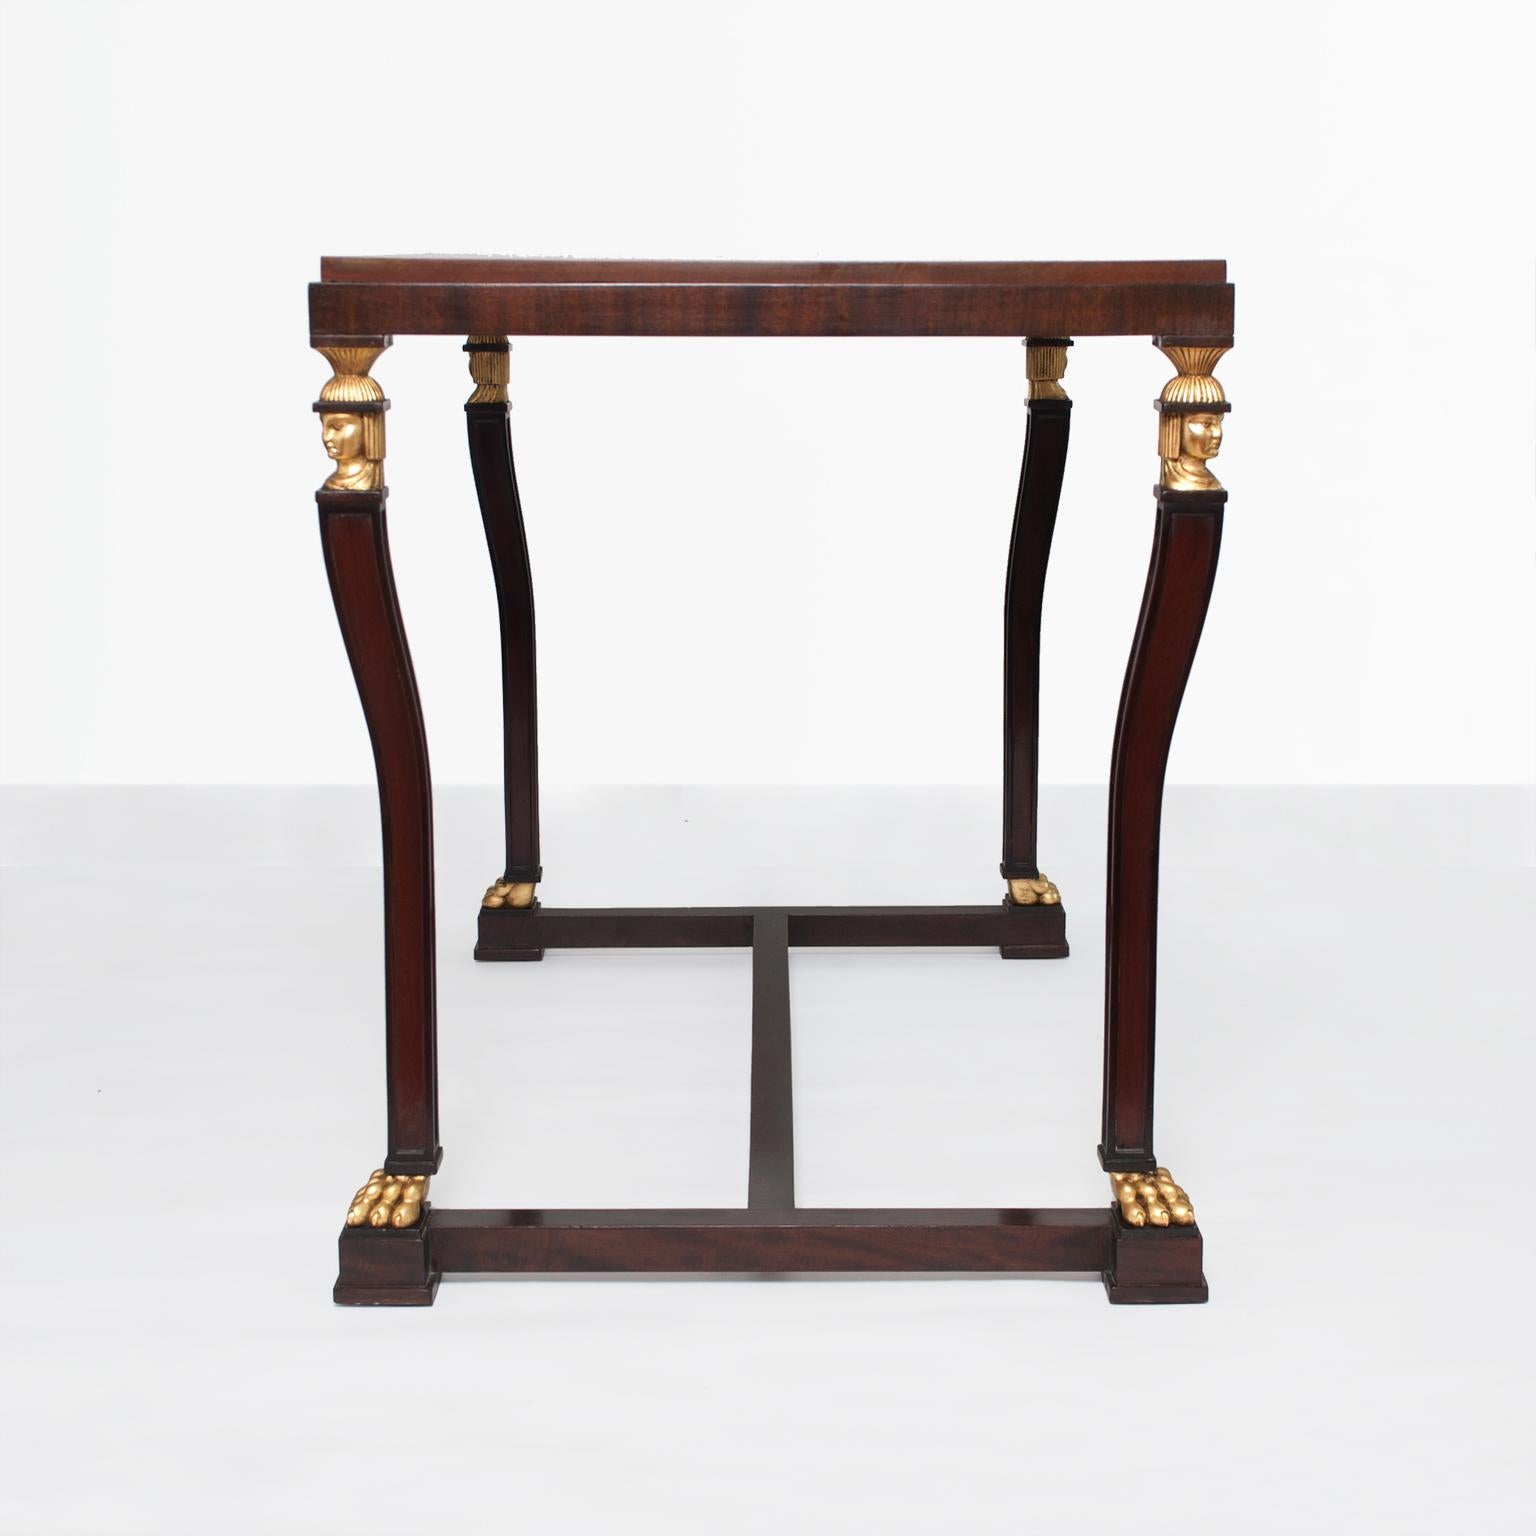 Polished Scandinavian Modern Mahogany Console Table with Parcel-Gilt Carved Caryatids